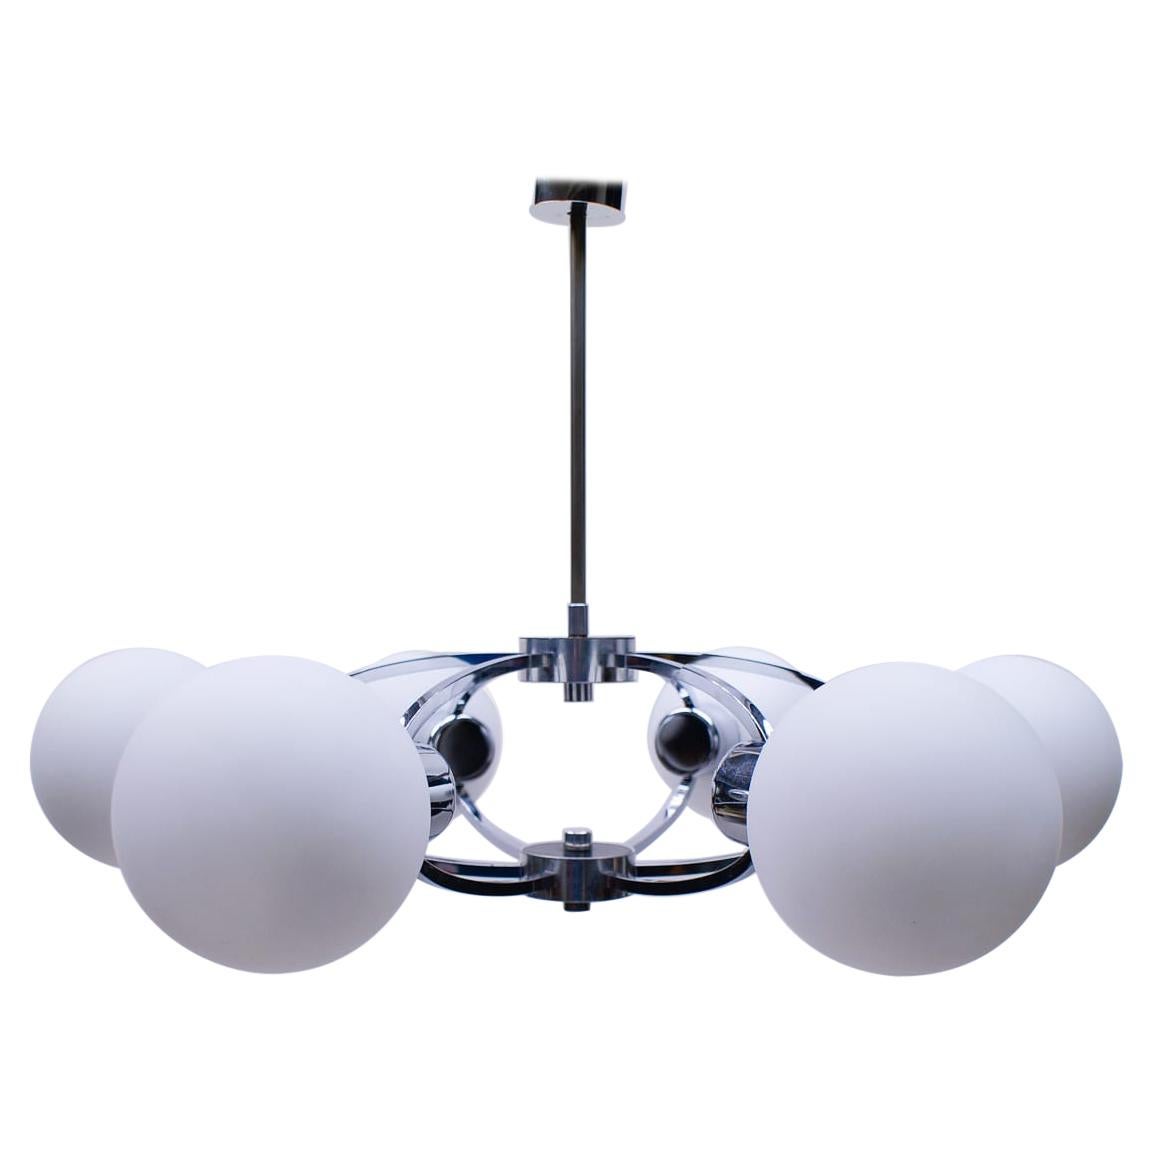 Elegant 1960s Chrome Ceiling Lamp with 6 Opaline Glass Globes